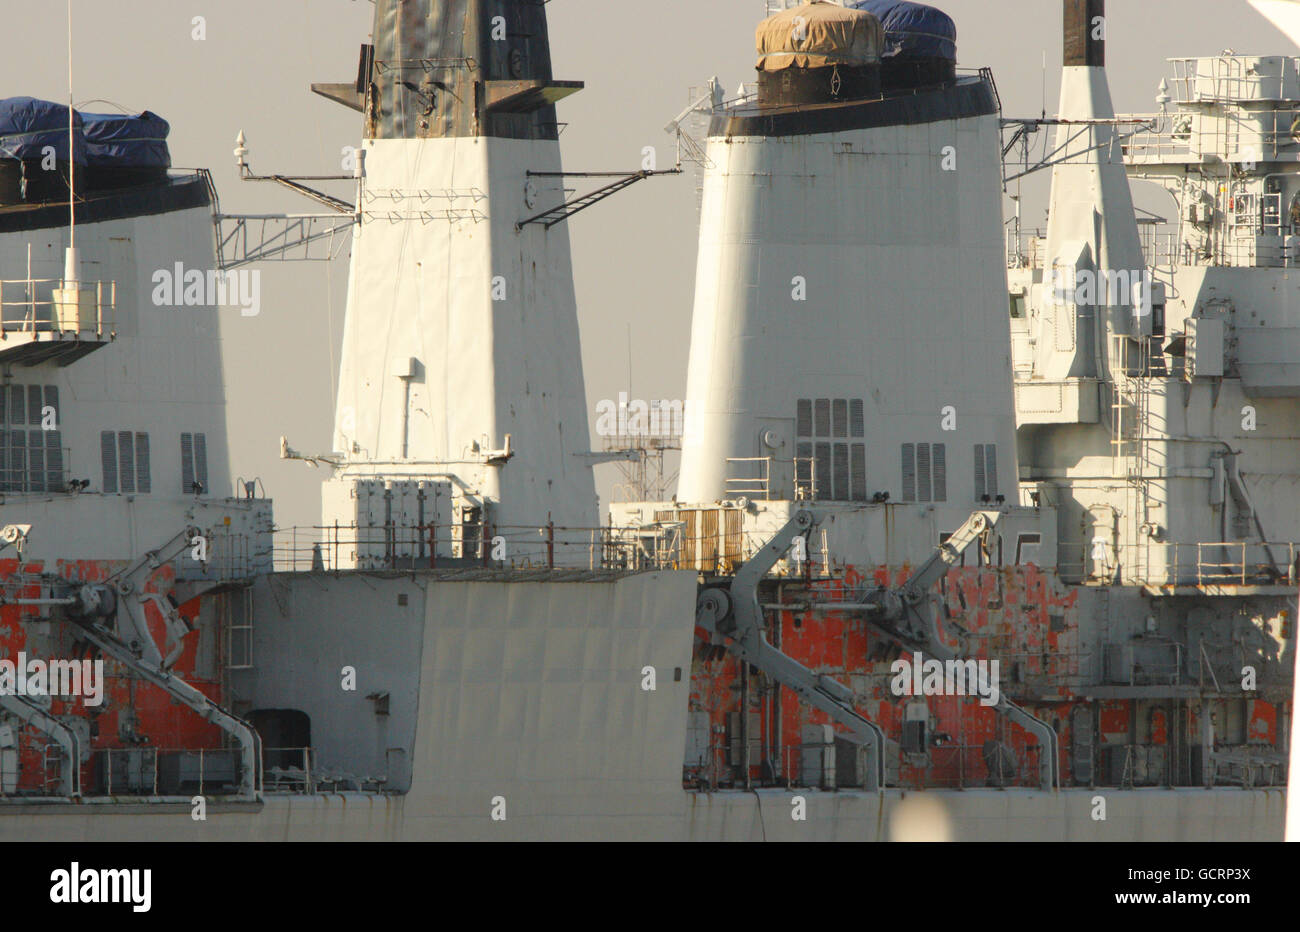 Royal Navy aircraft carrier HMS Invincible at the Royal Navy Dockyard in Portsmouth, Hampshire, where it is waiting to be disposed of. Stock Photo